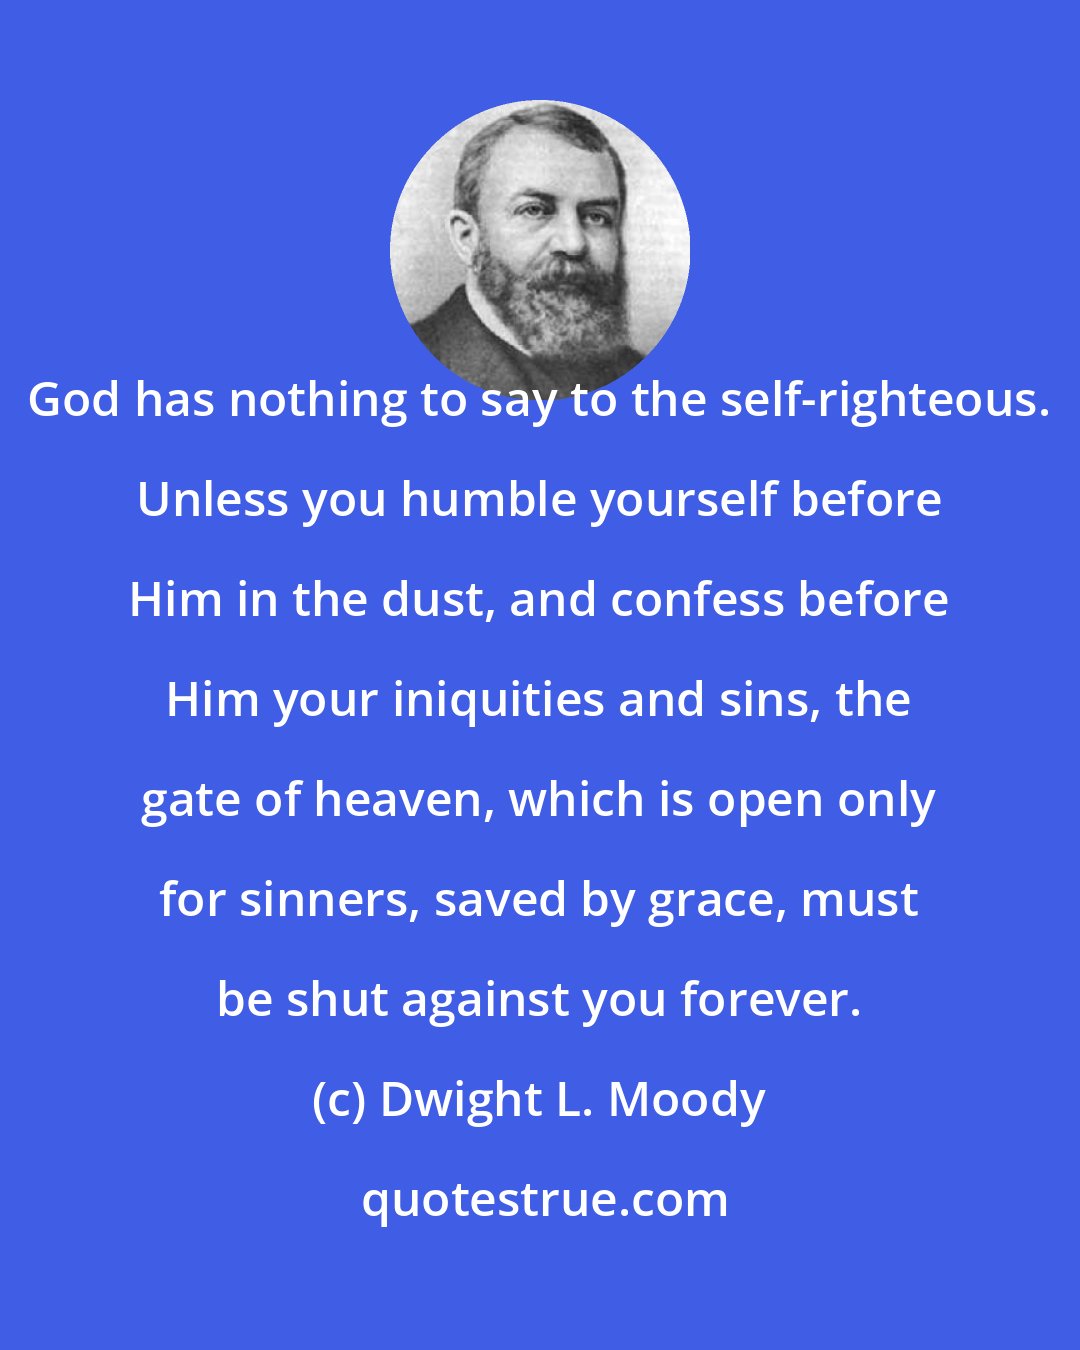 Dwight L. Moody: God has nothing to say to the self-righteous. Unless you humble yourself before Him in the dust, and confess before Him your iniquities and sins, the gate of heaven, which is open only for sinners, saved by grace, must be shut against you forever.